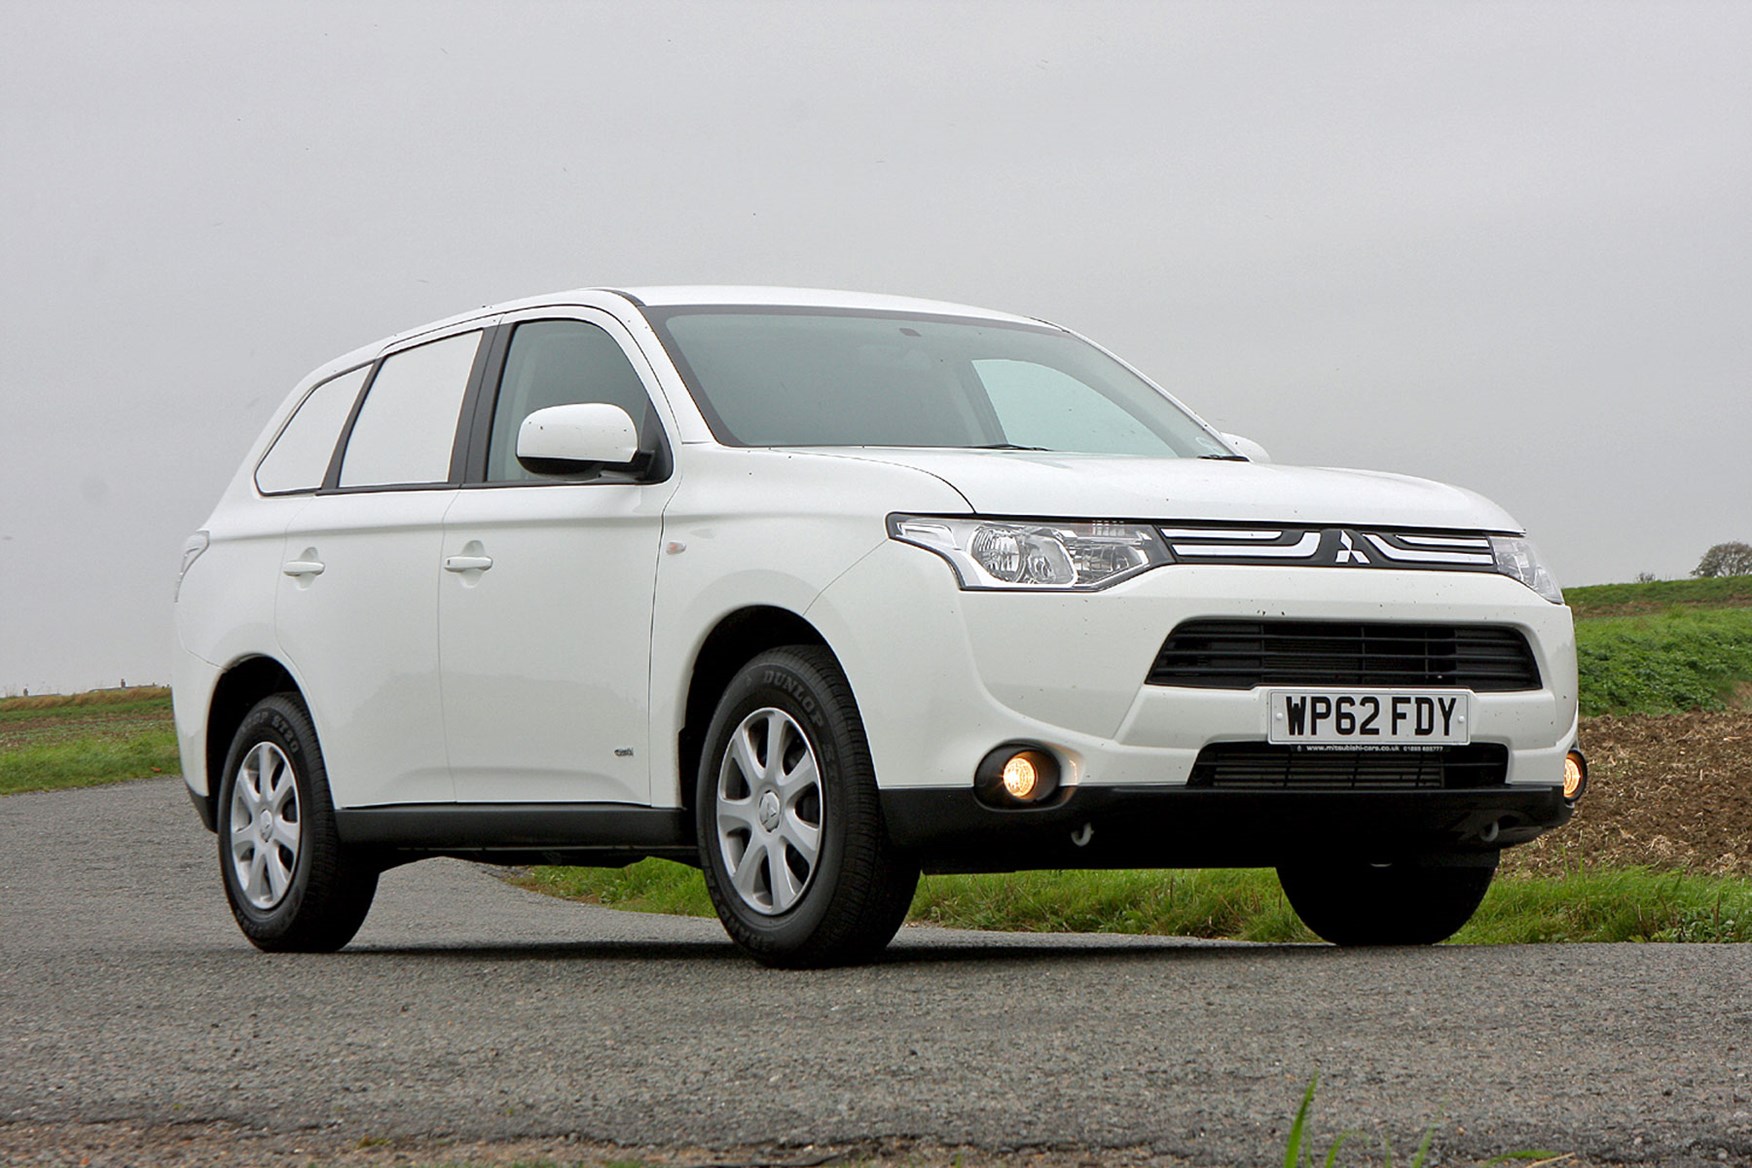 Mitsubishi Outlander Commercial 4x4 van review - 2013 diesel, white, front view